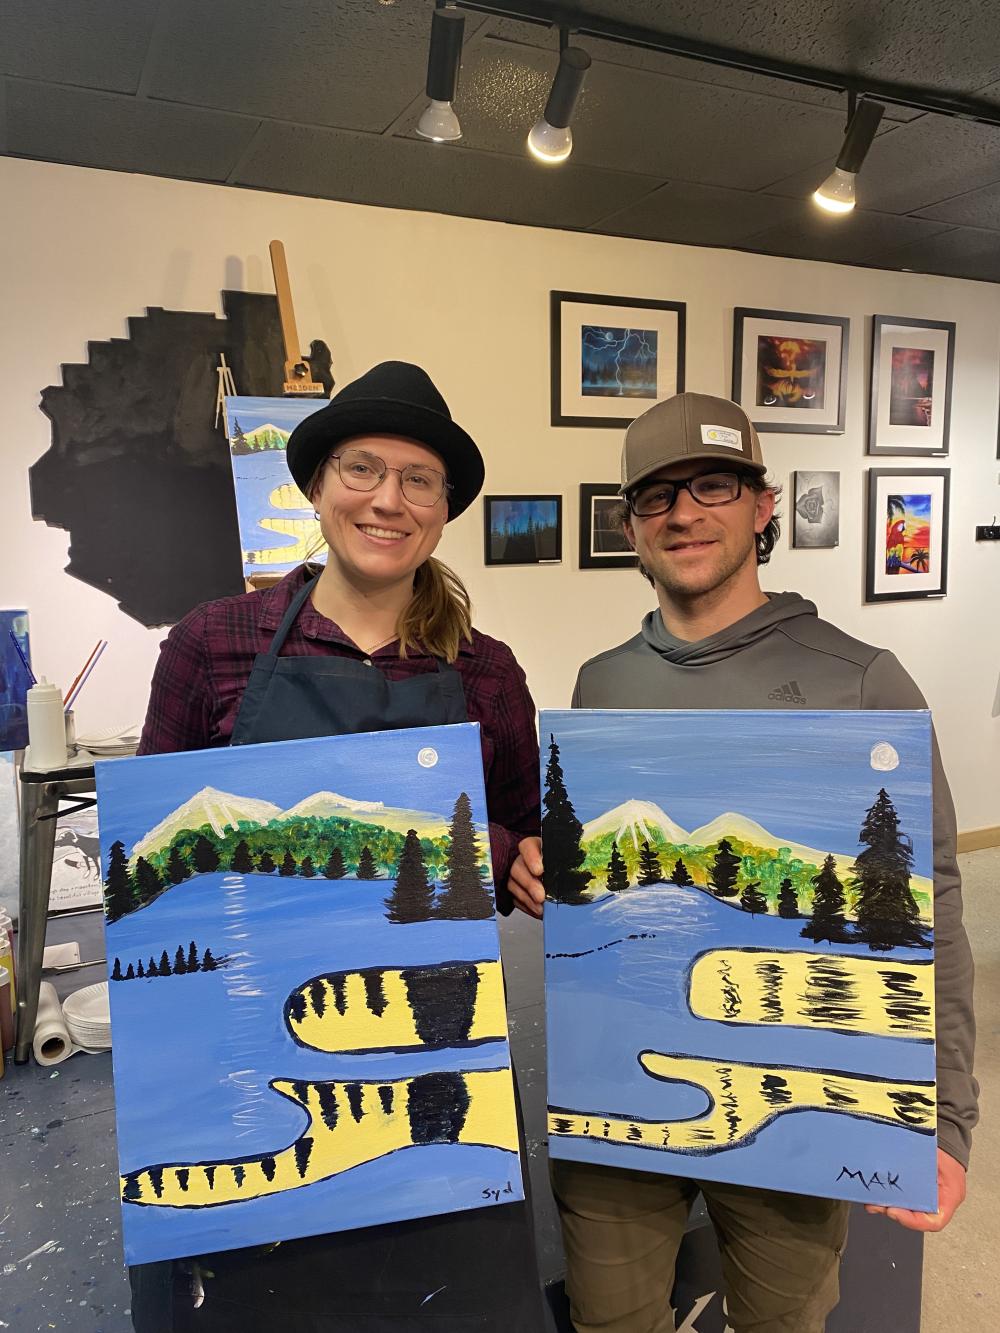 A man and a woman hold up paintings, each a version of the same image, from an art class.